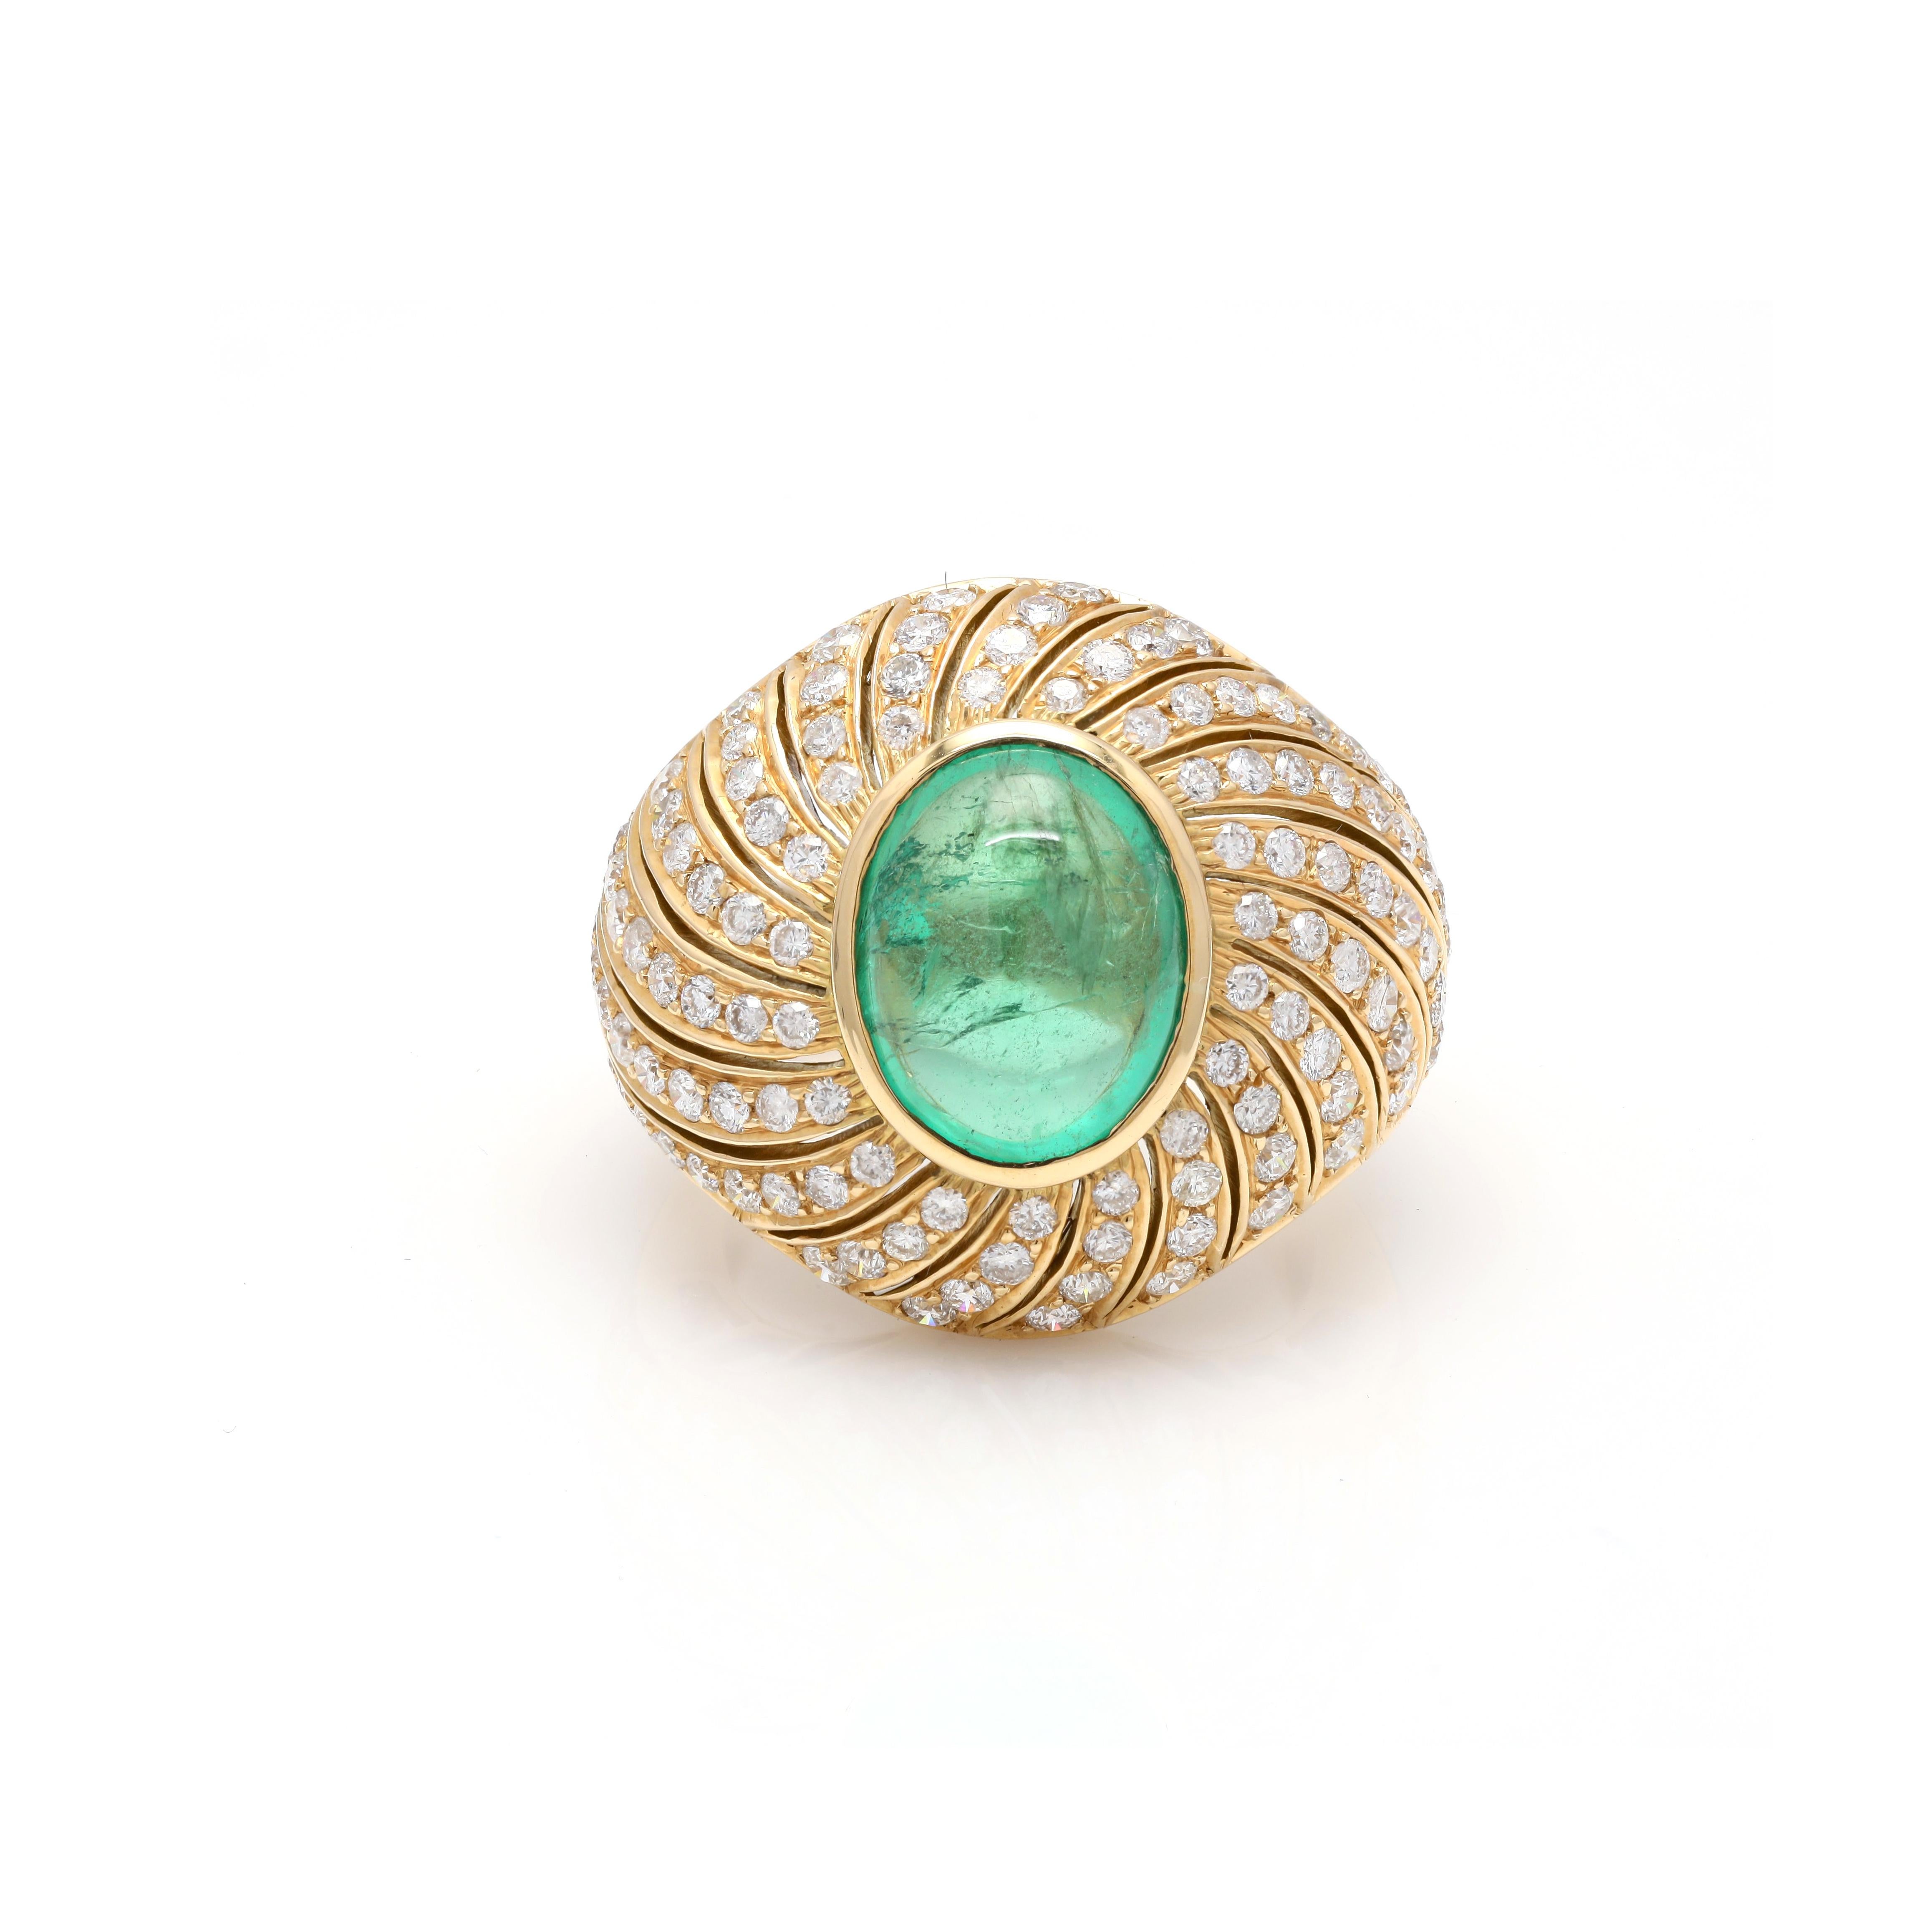 For Sale:  Mesmerizing 4.38 Carat Emerald Cocktail Ring with Diamonds in 18K Yellow Gold 2